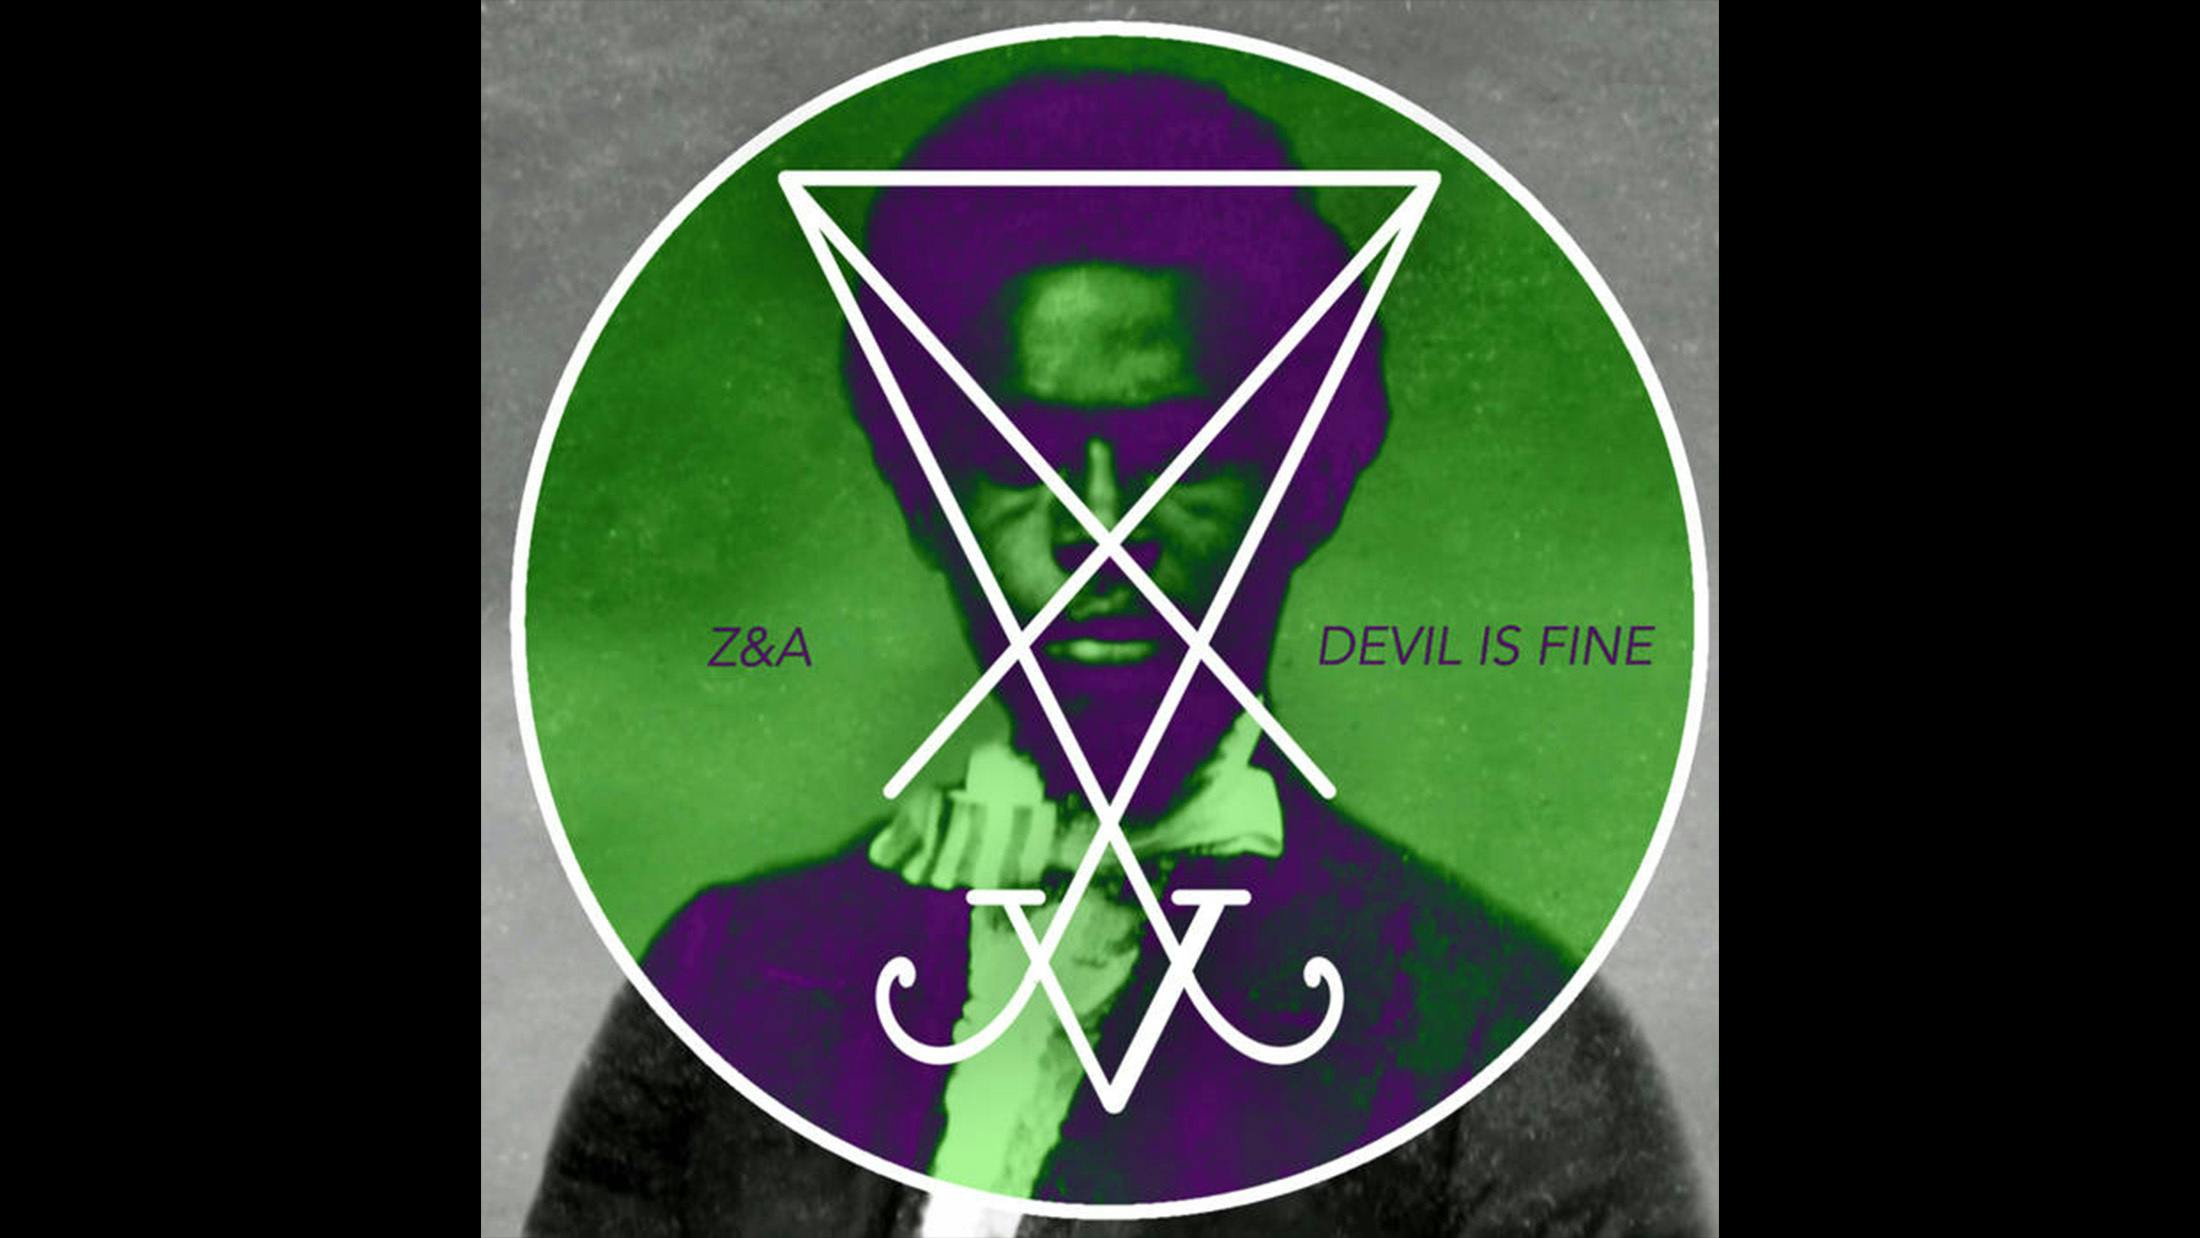 "I have never heard the stylistic combinations displayed on Zeal & Ardor’s full length. Combining black metal and [African-American slave music]. Devil is truly a masterful work; somehow these two completely opposite worlds fuse so well together, painting some of the most unique worlds unheard of before in extreme metal."